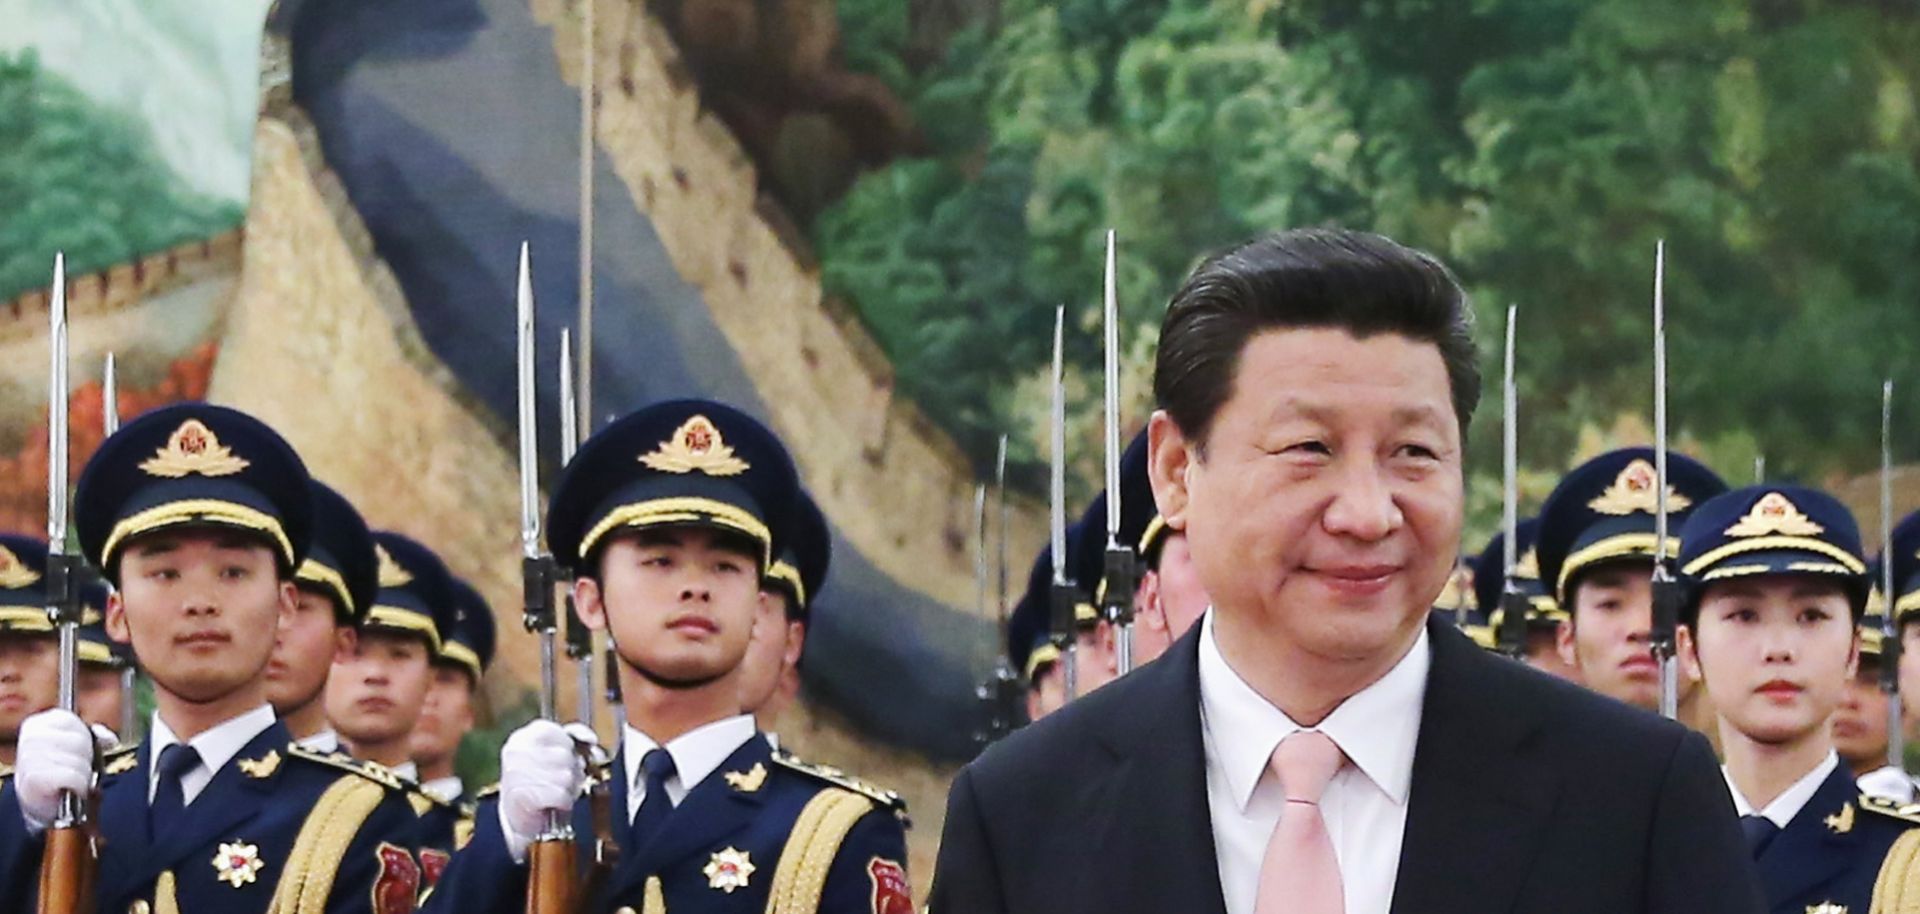 Chinese President Xi Jinping is expanding his anti-corruption campaign in 2016 to achieve various political and economic goals.